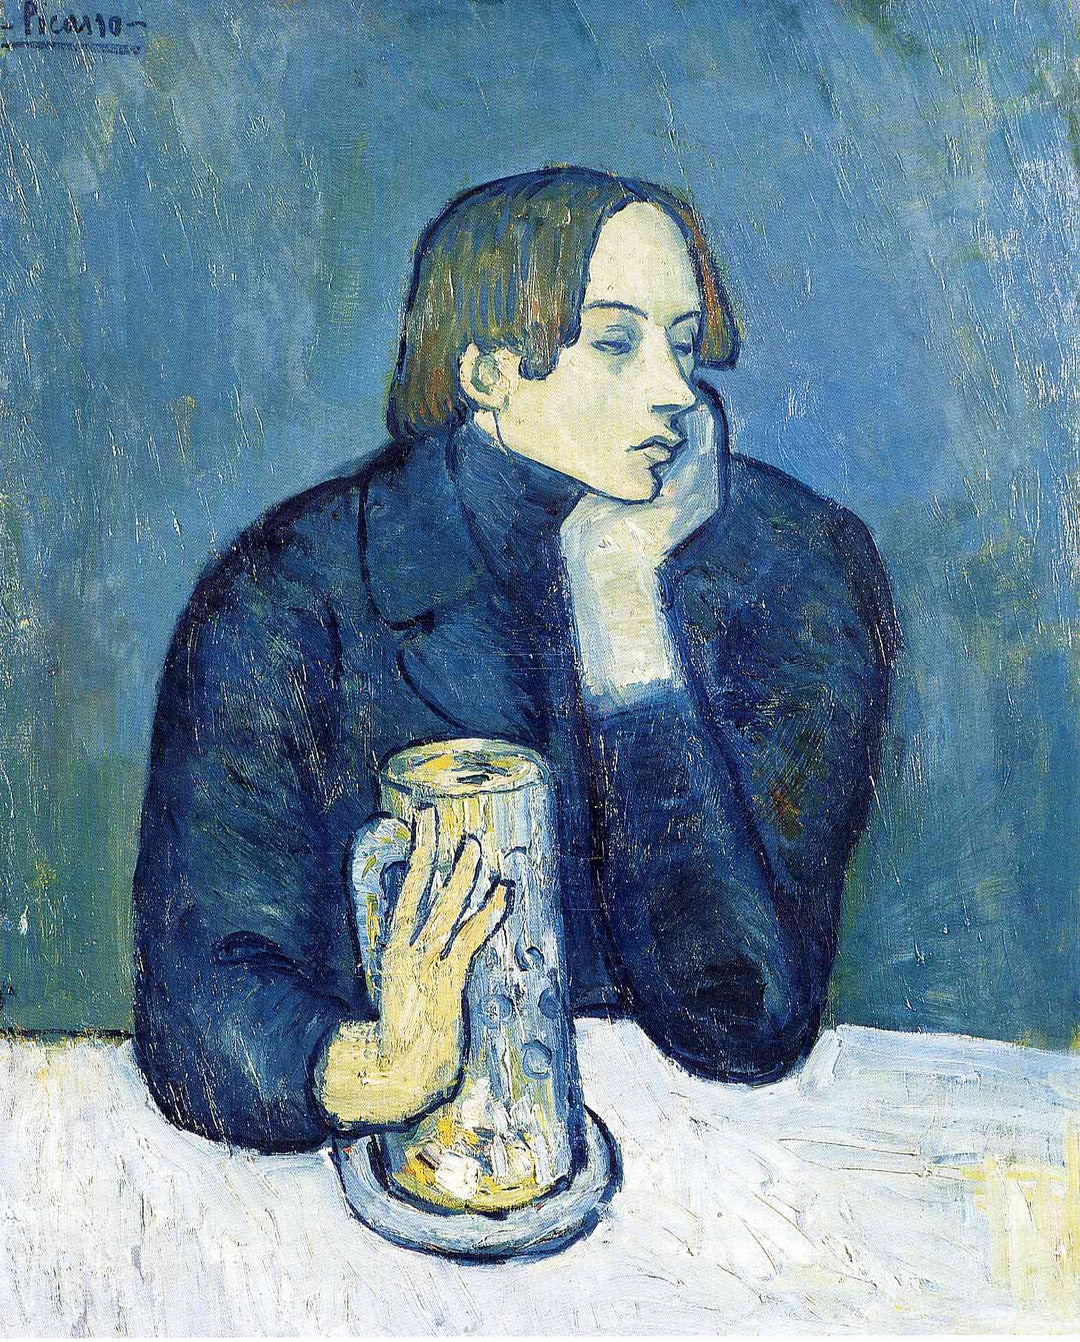 Portrait of Jaime Sabartes. The bock by Pablo Picasso. Picasso artworks, Picasso wall art, Picasso canvas art, Picasso reproduction for sale, Picasso oil painting on canvas, Blue Surf Art